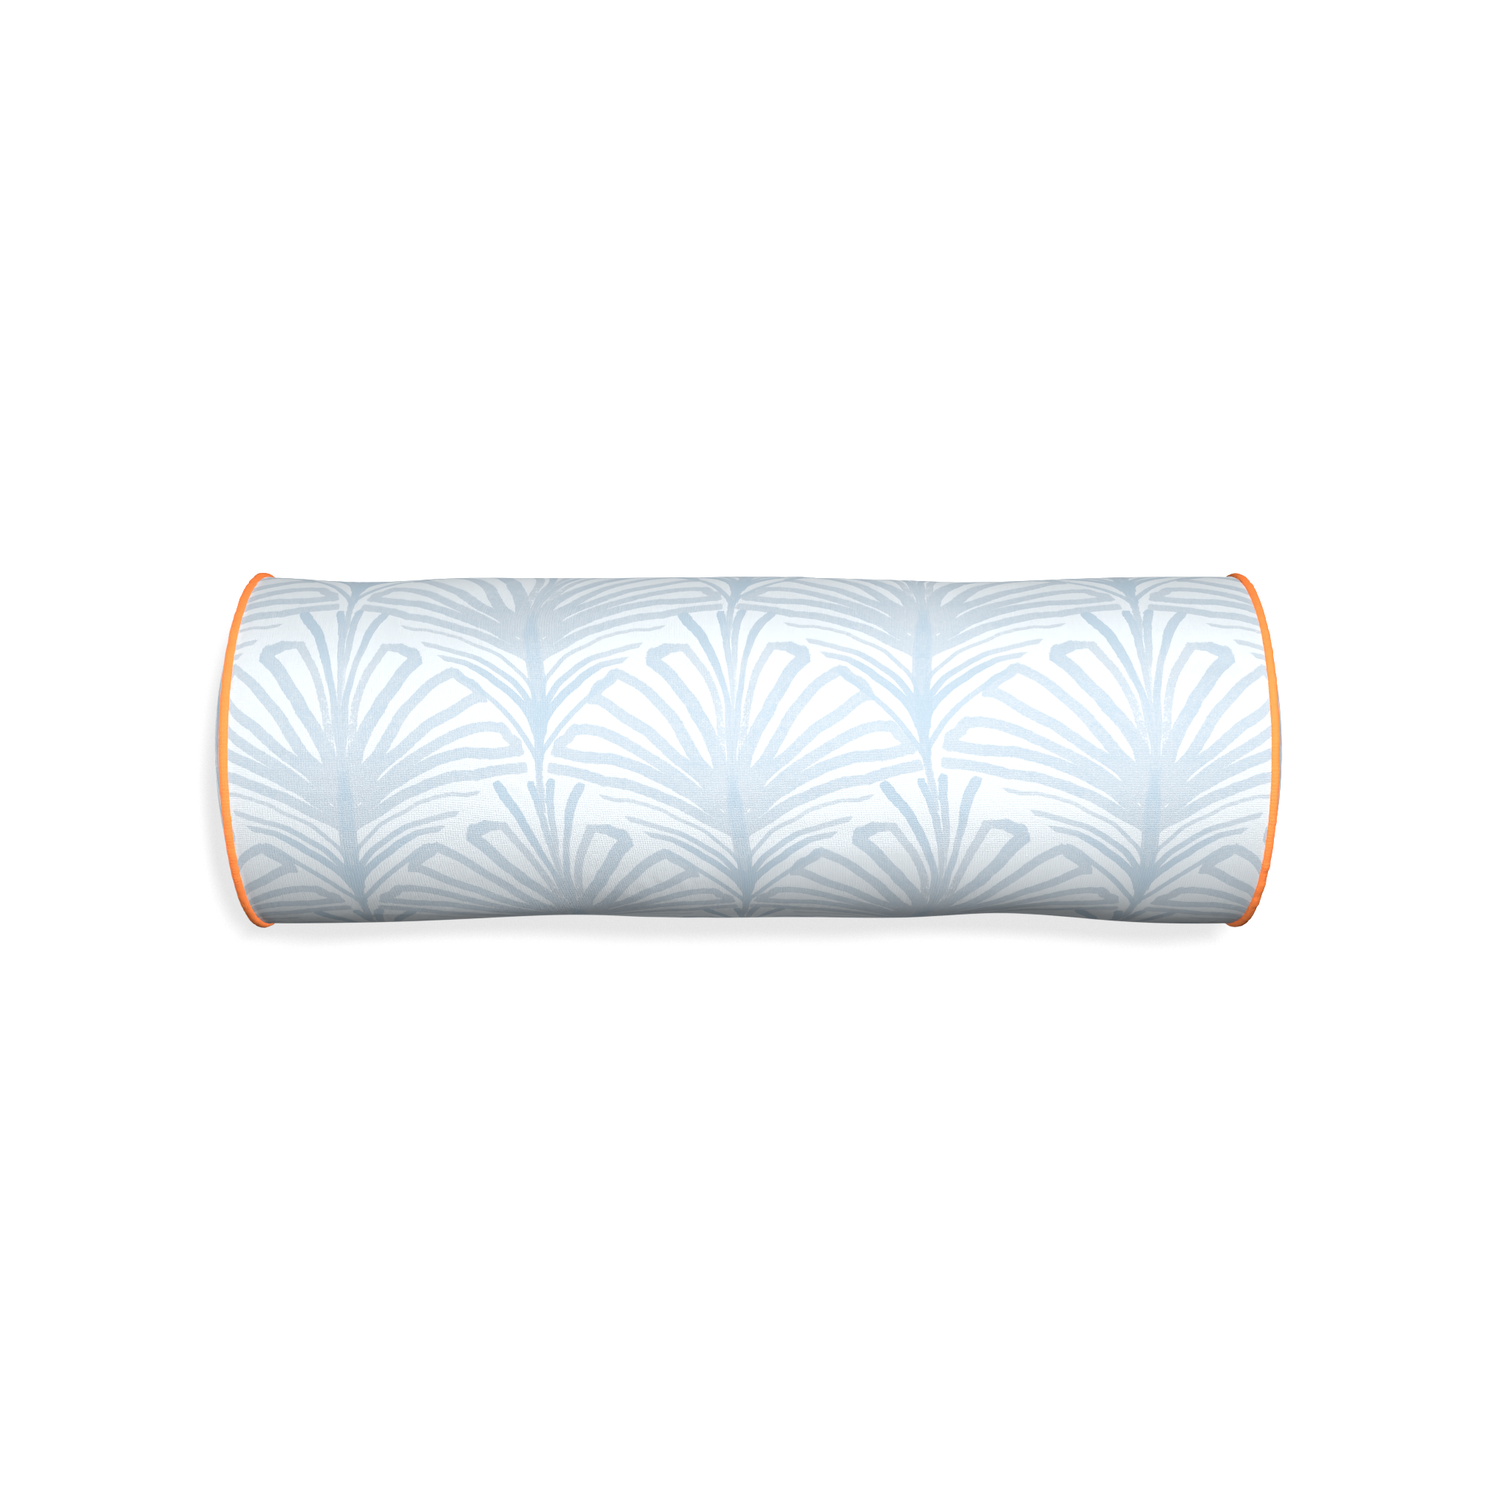 Bolster suzy sky custom pillow with clementine piping on white background